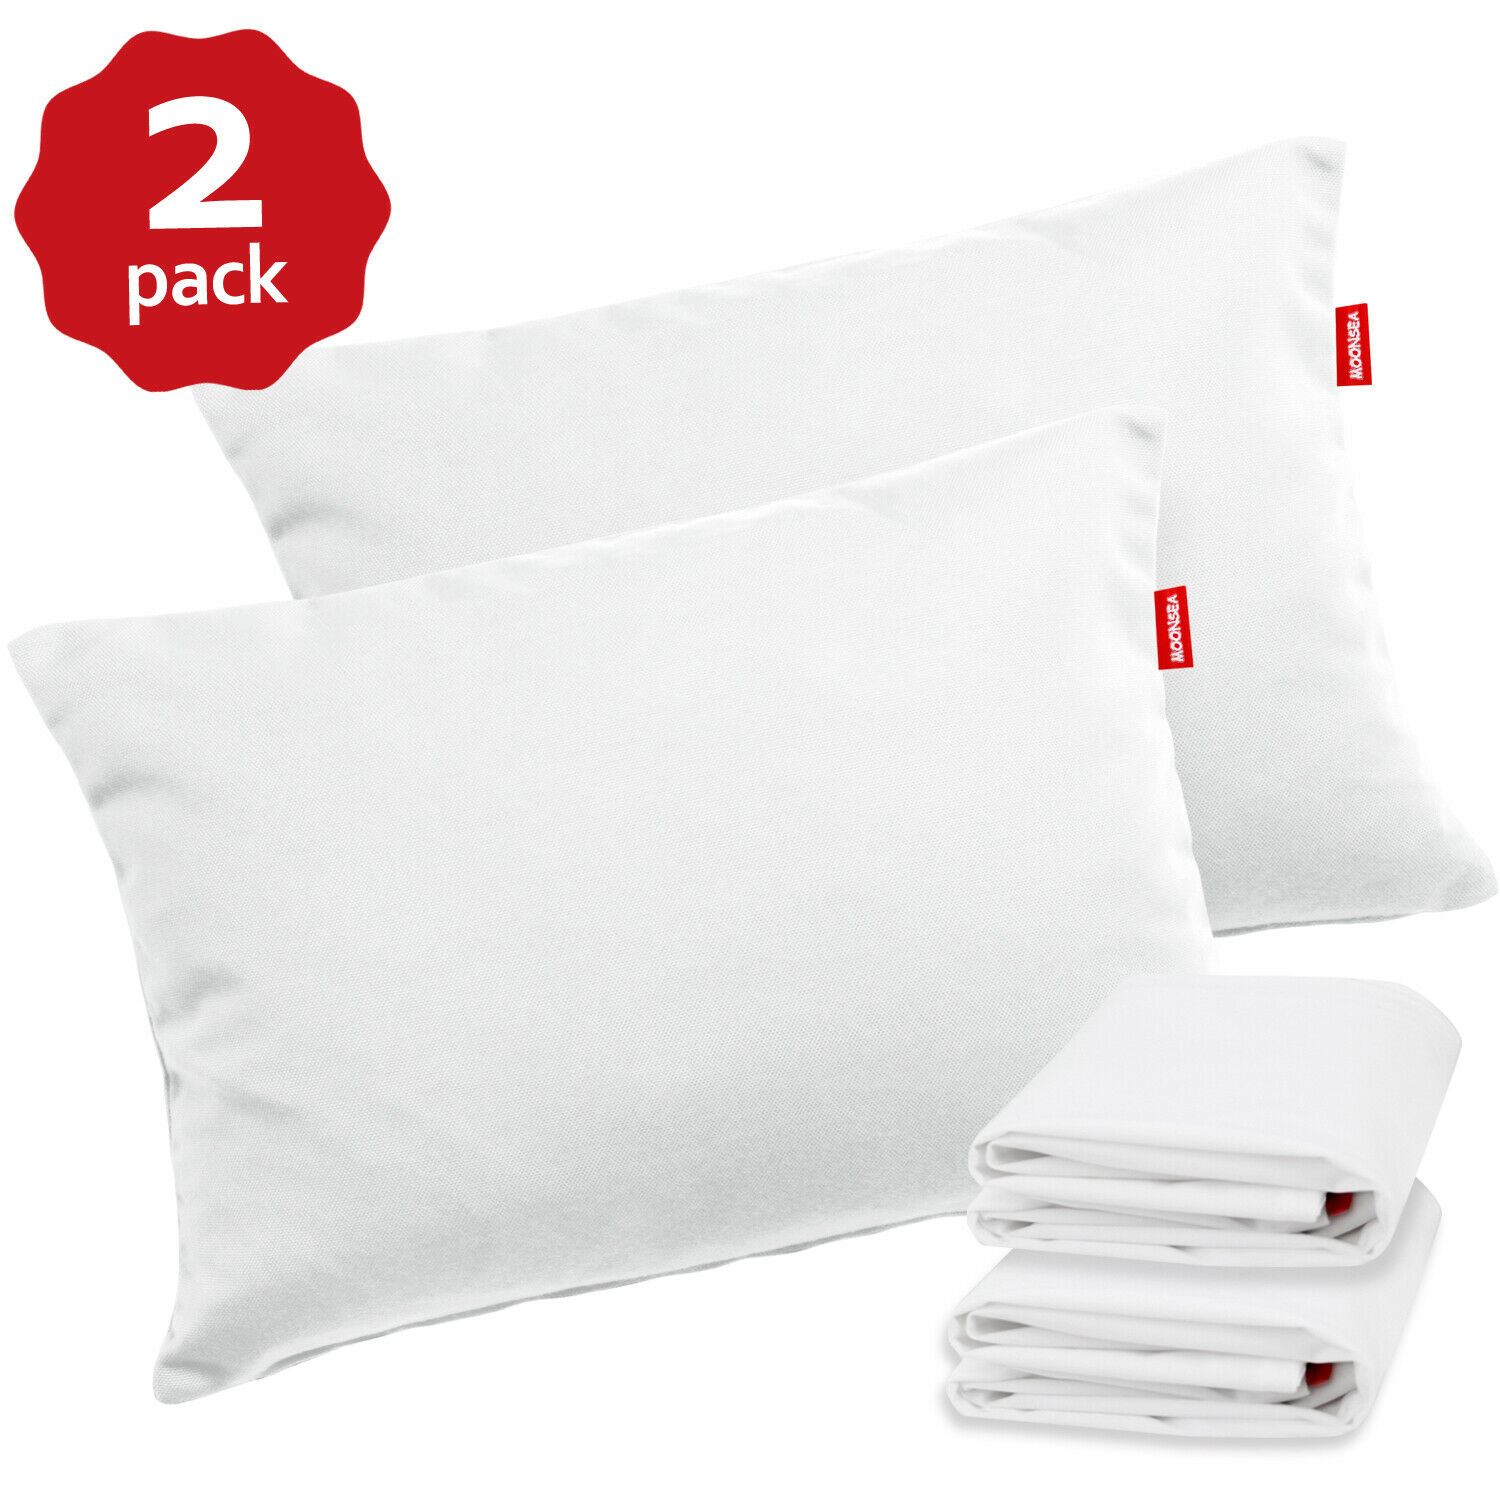 Toddler Pillows With 100% Cotton Pillowcase 2 Pack 14"x19" Kids Pillow Ages 2-5